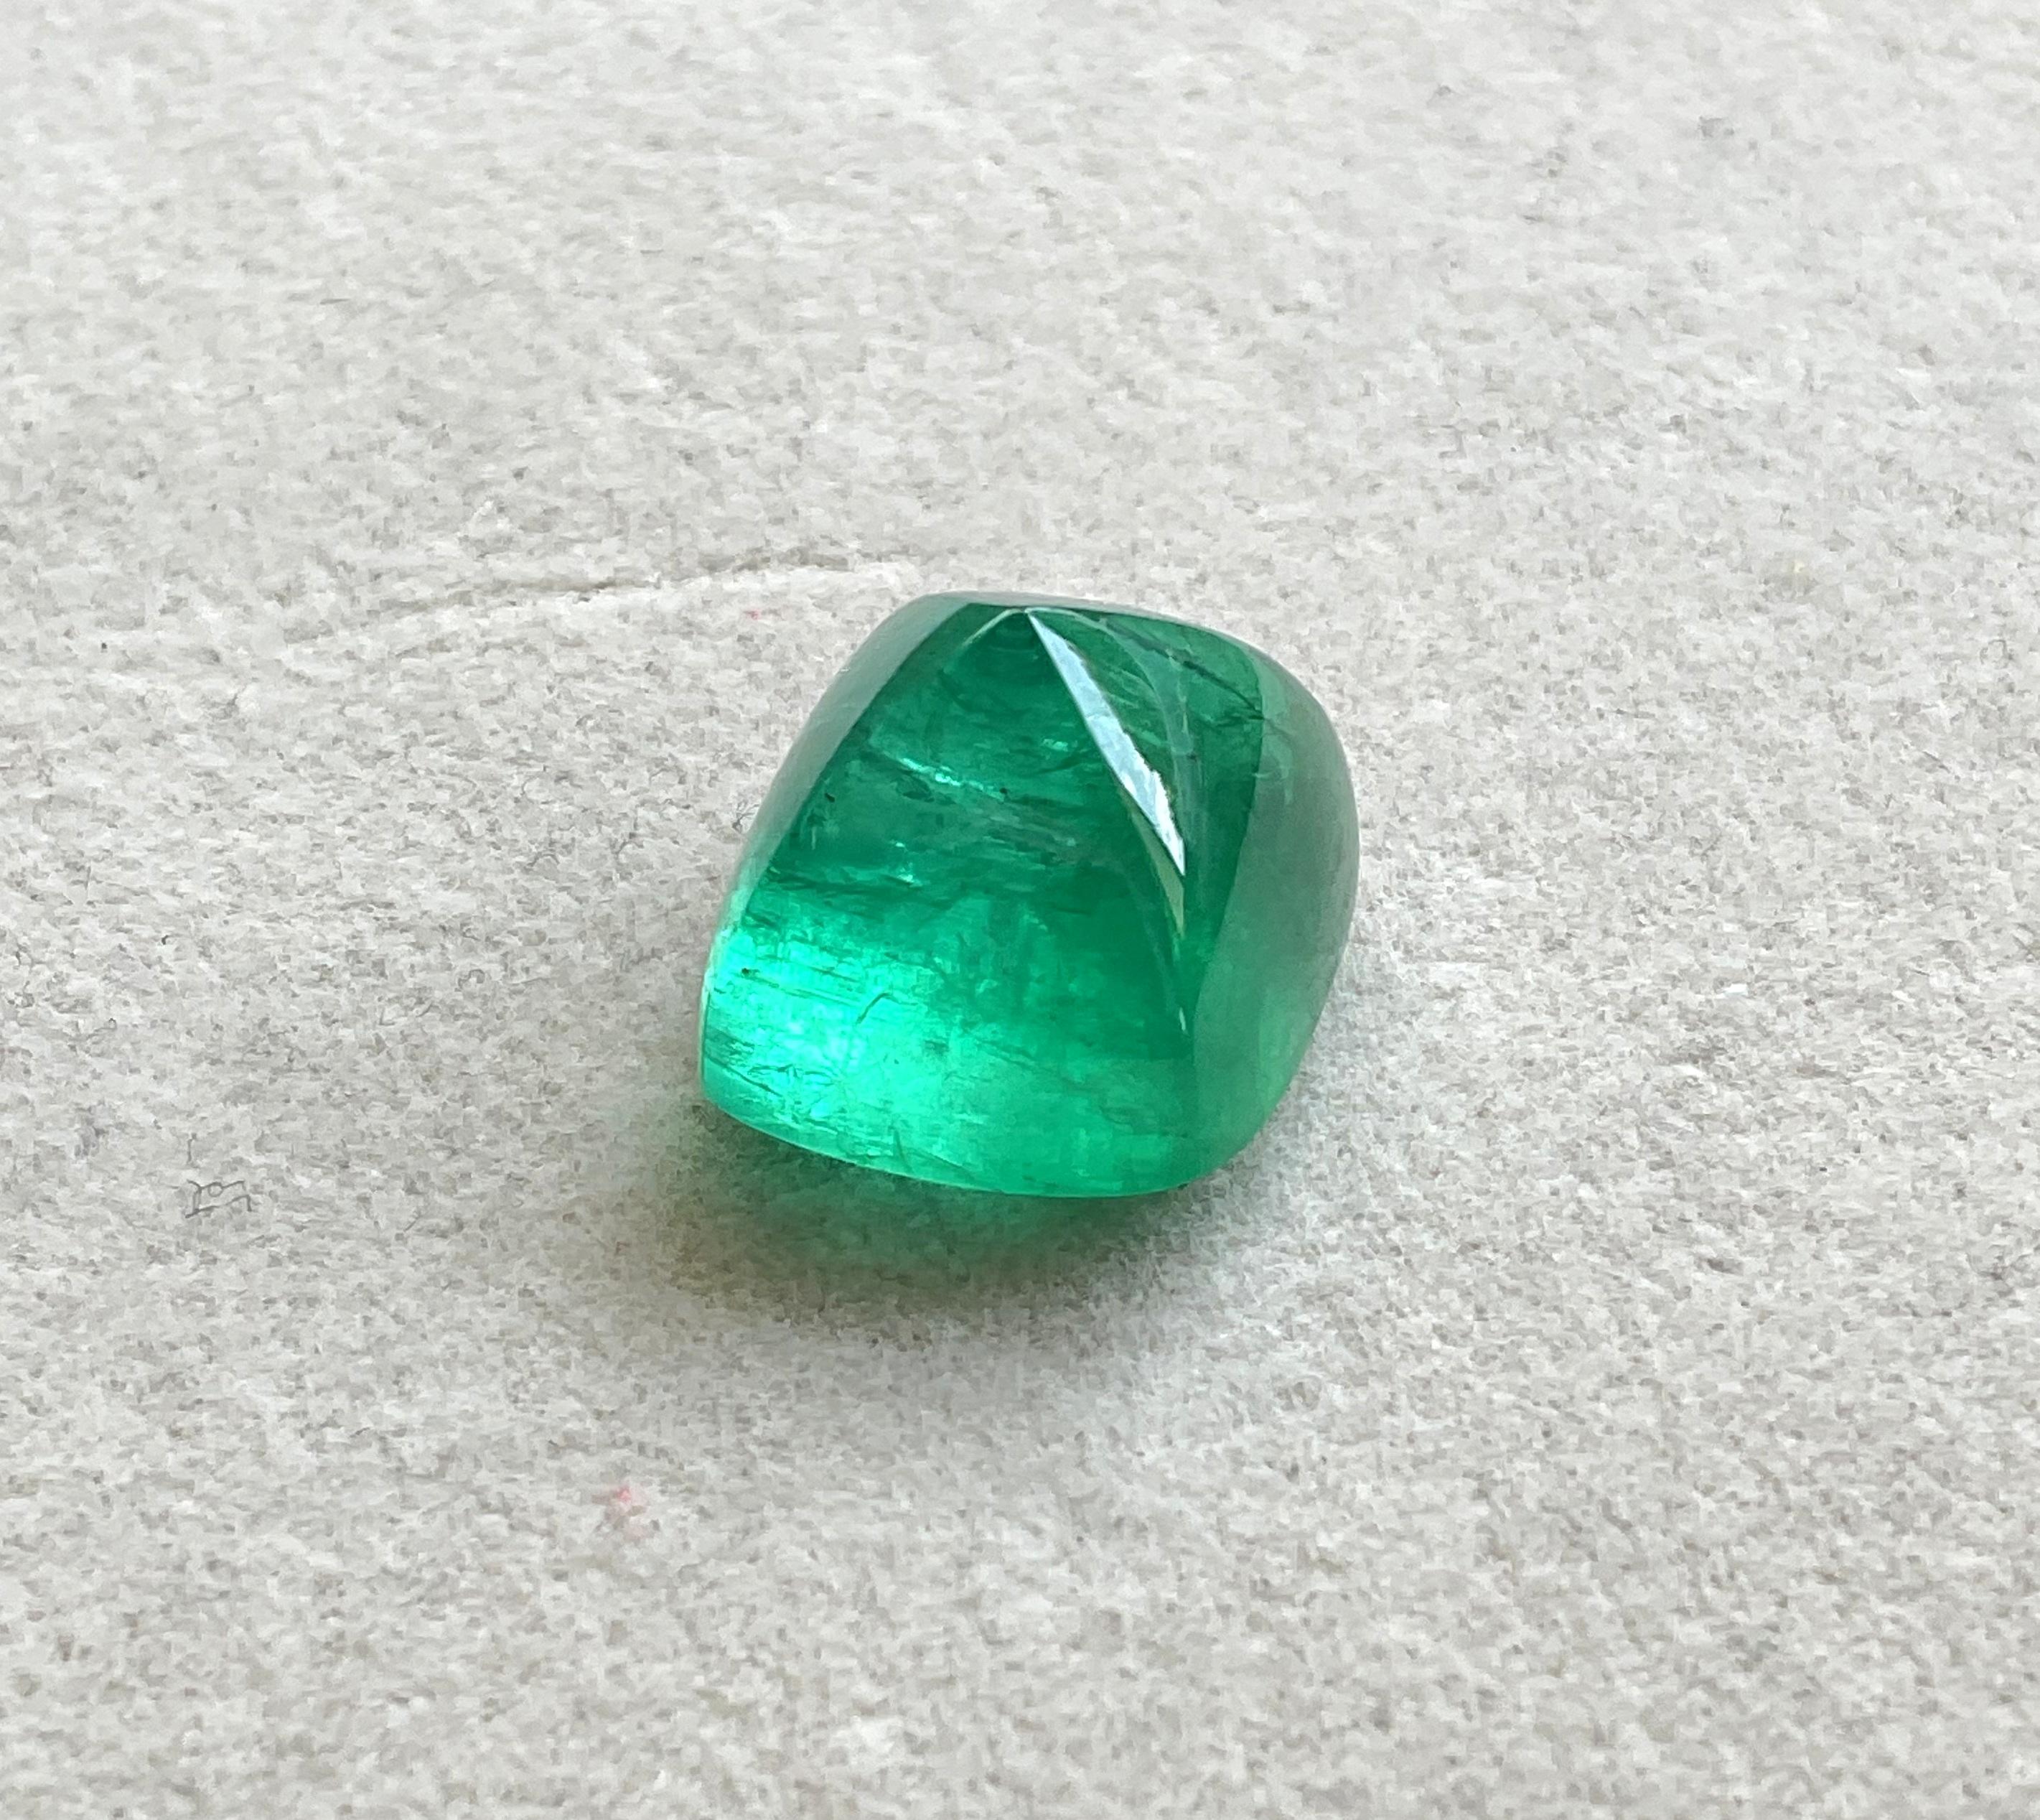 Certified 25.38 Cts Zambian Emerald Sugarloaf Cabochon Top Quality Natural Gem For Sale 2